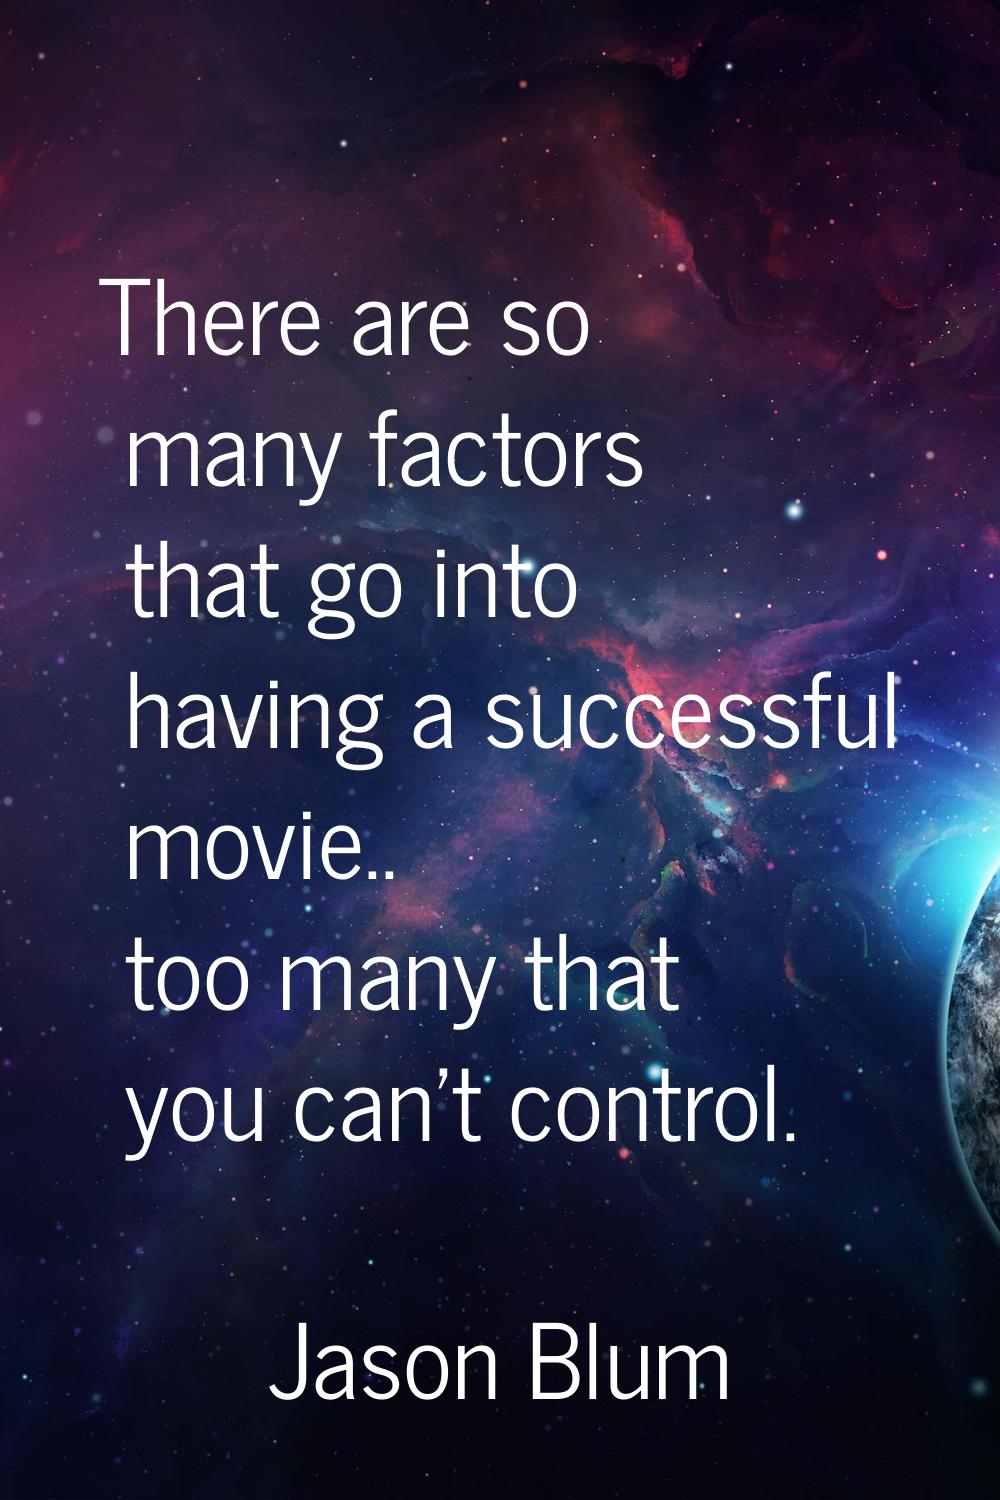 There are so many factors that go into having a successful movie.. too many that you can't control.